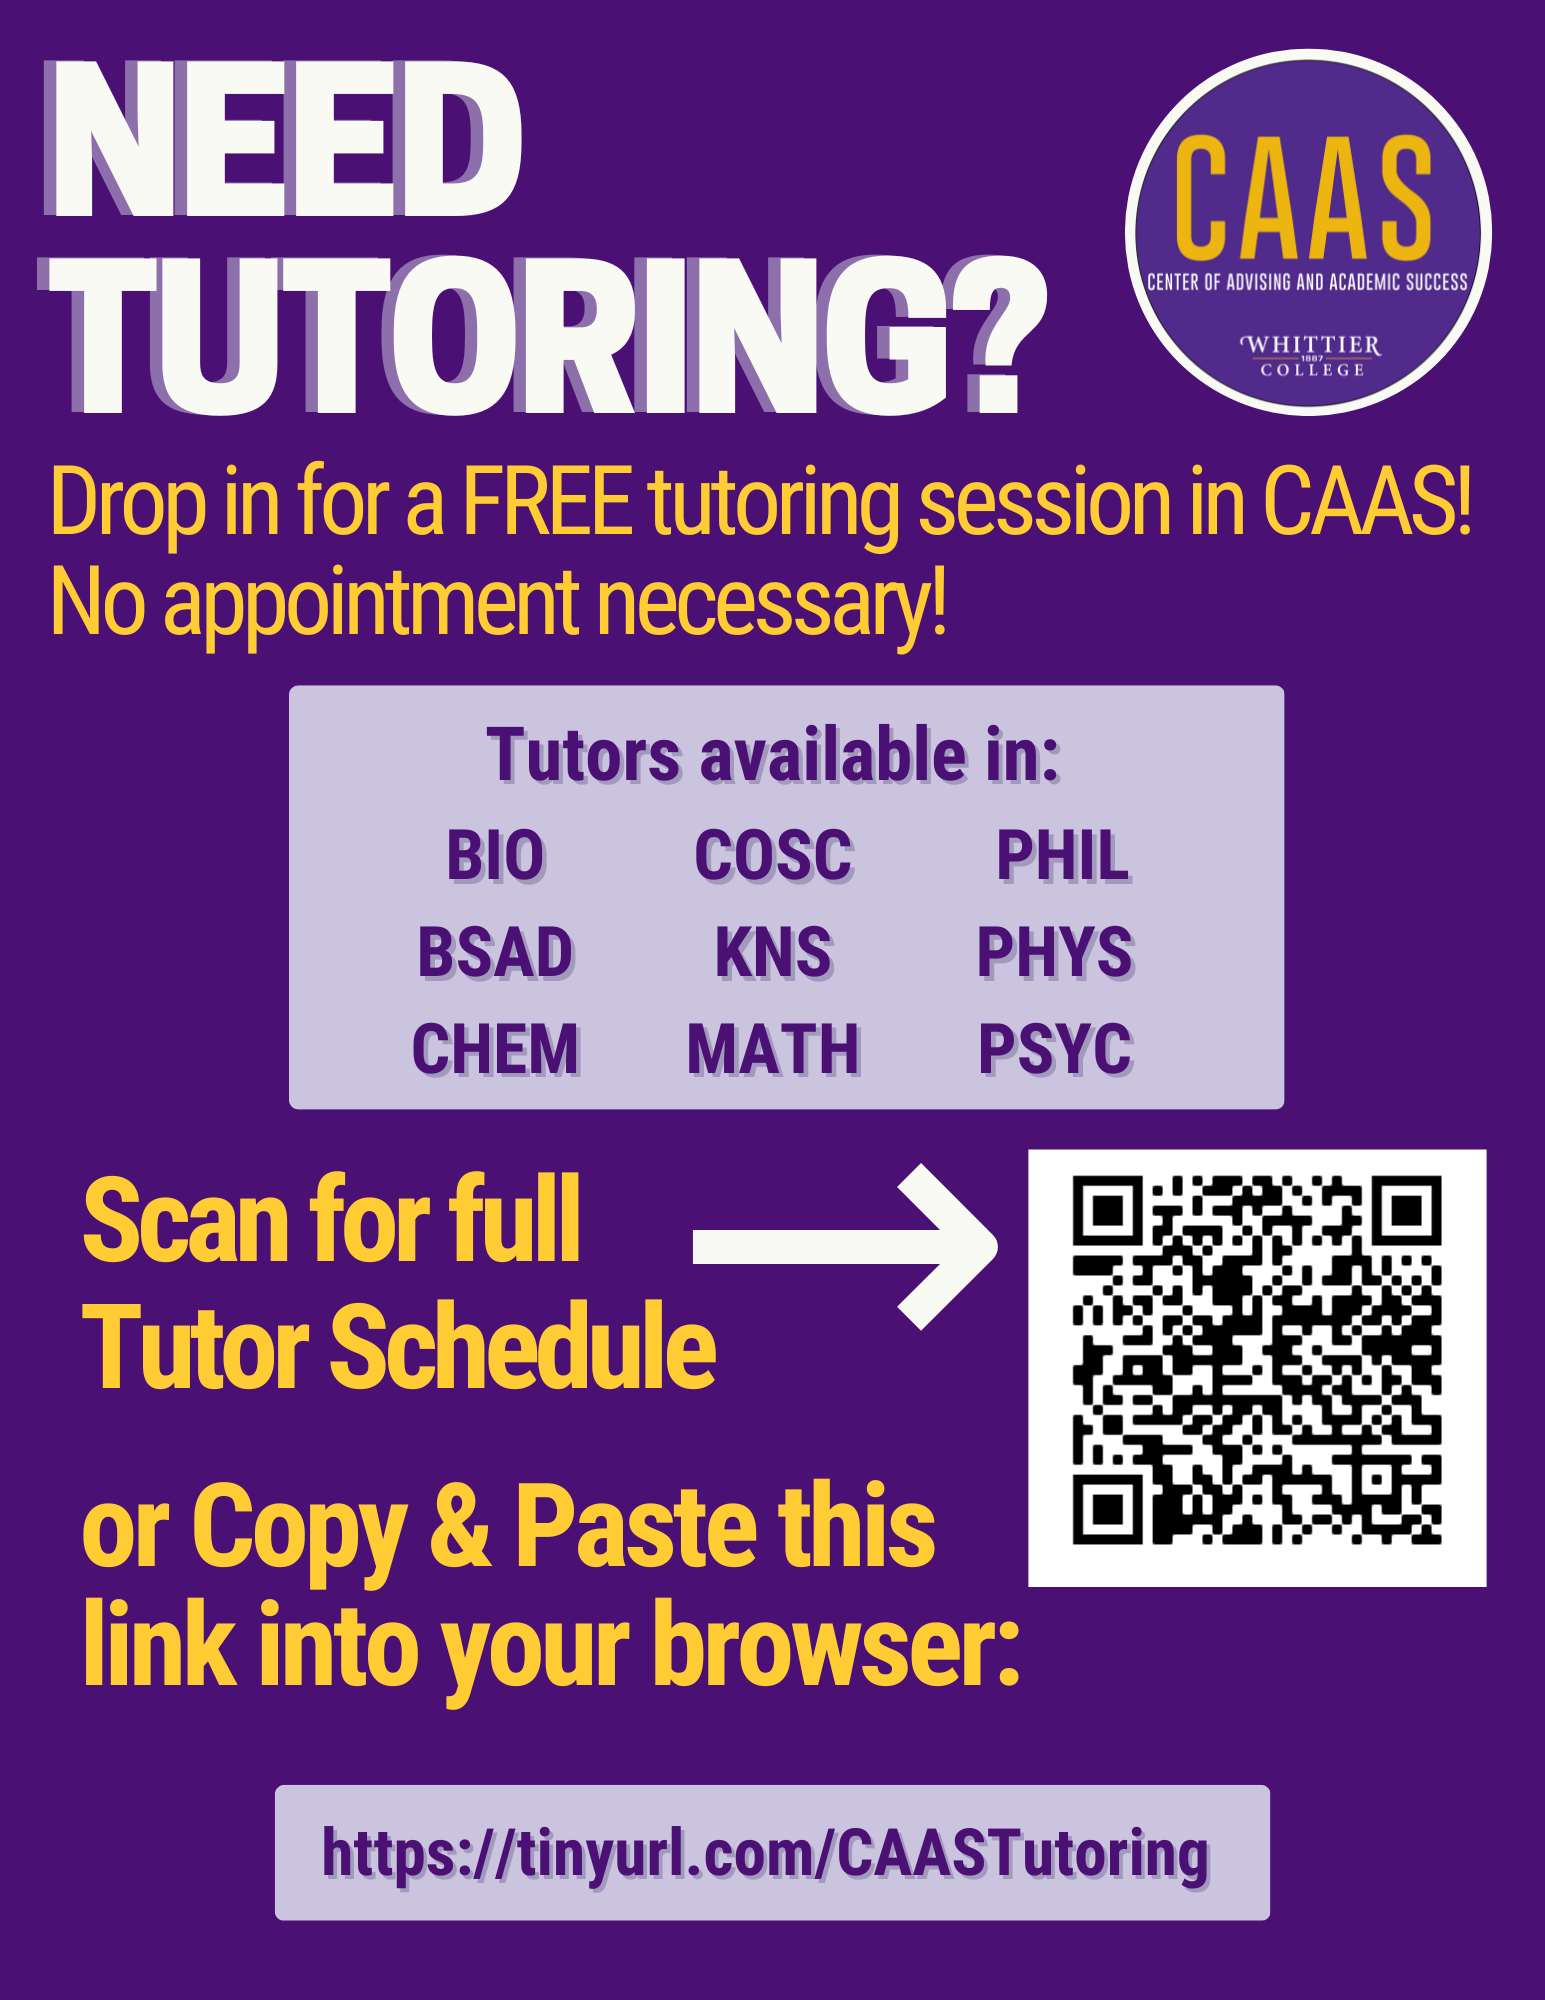 Need tutoring flyer with information